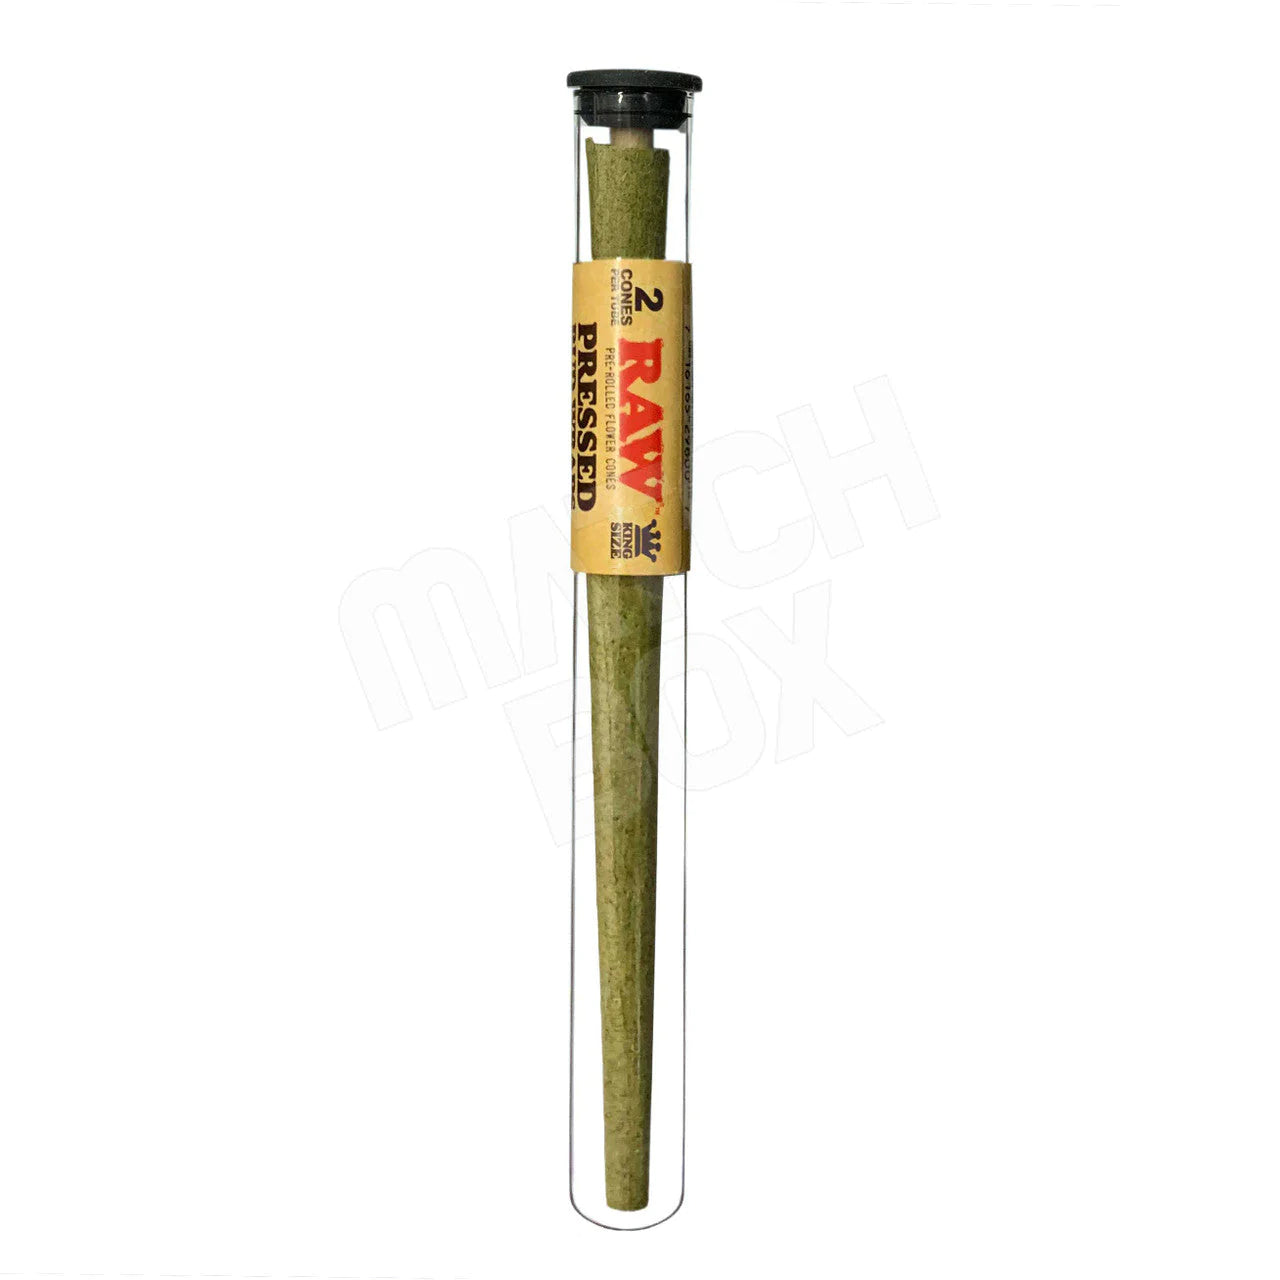 RAW- PRESSED BUD WRAP PRE ROLLED FLOWER CONES 2CT KING SIZE